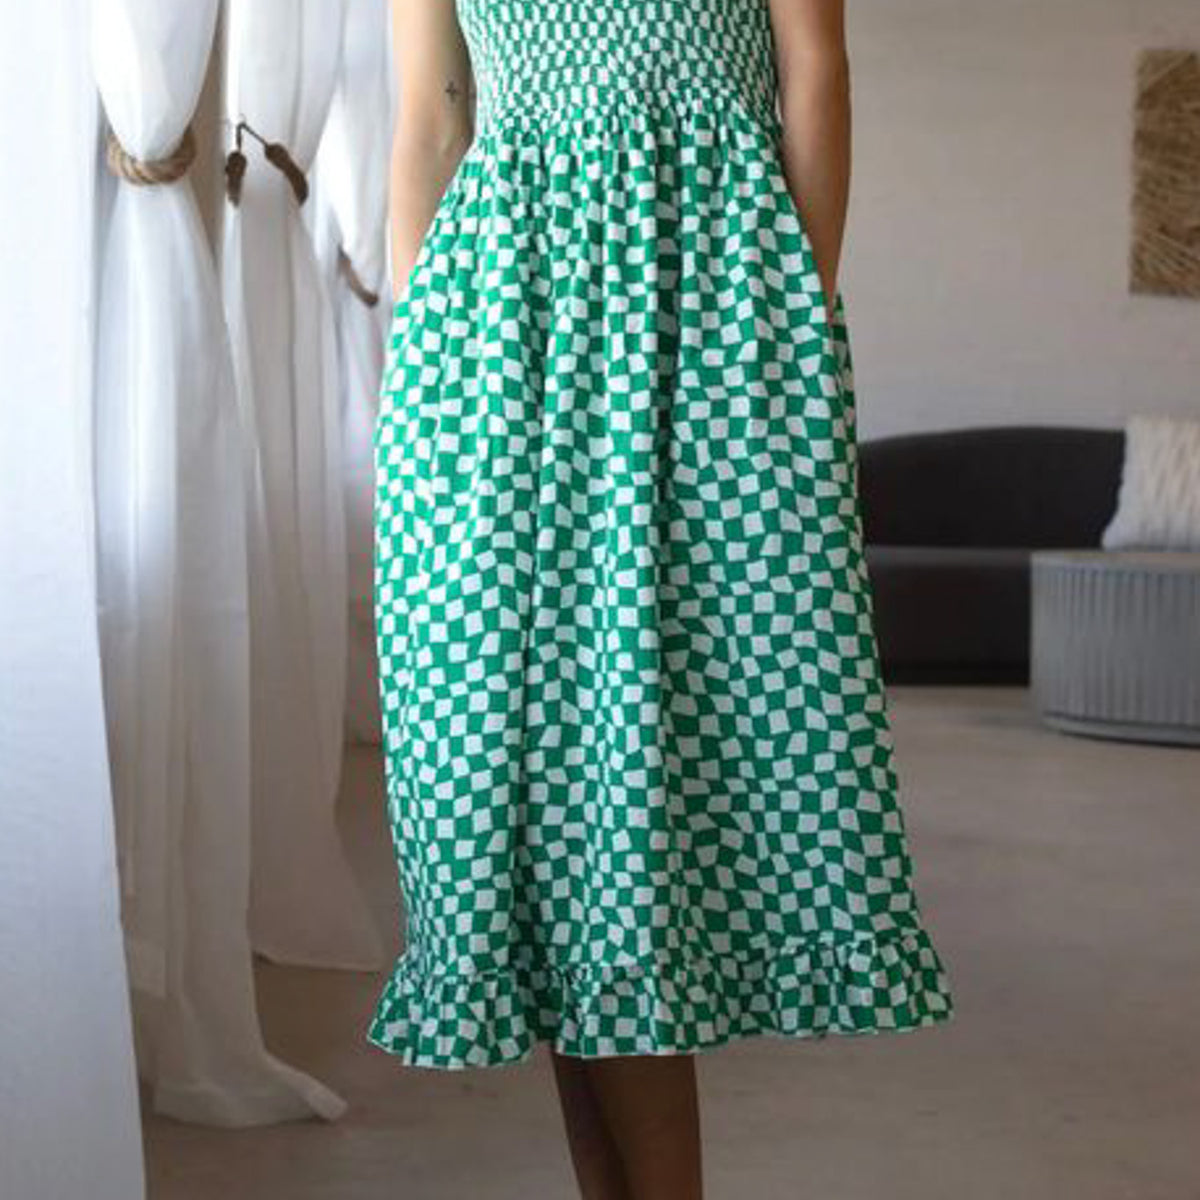 L-XL-001 TO XL-020 PRELOVED LARGE TO XL Sunday Dress Casual Dress